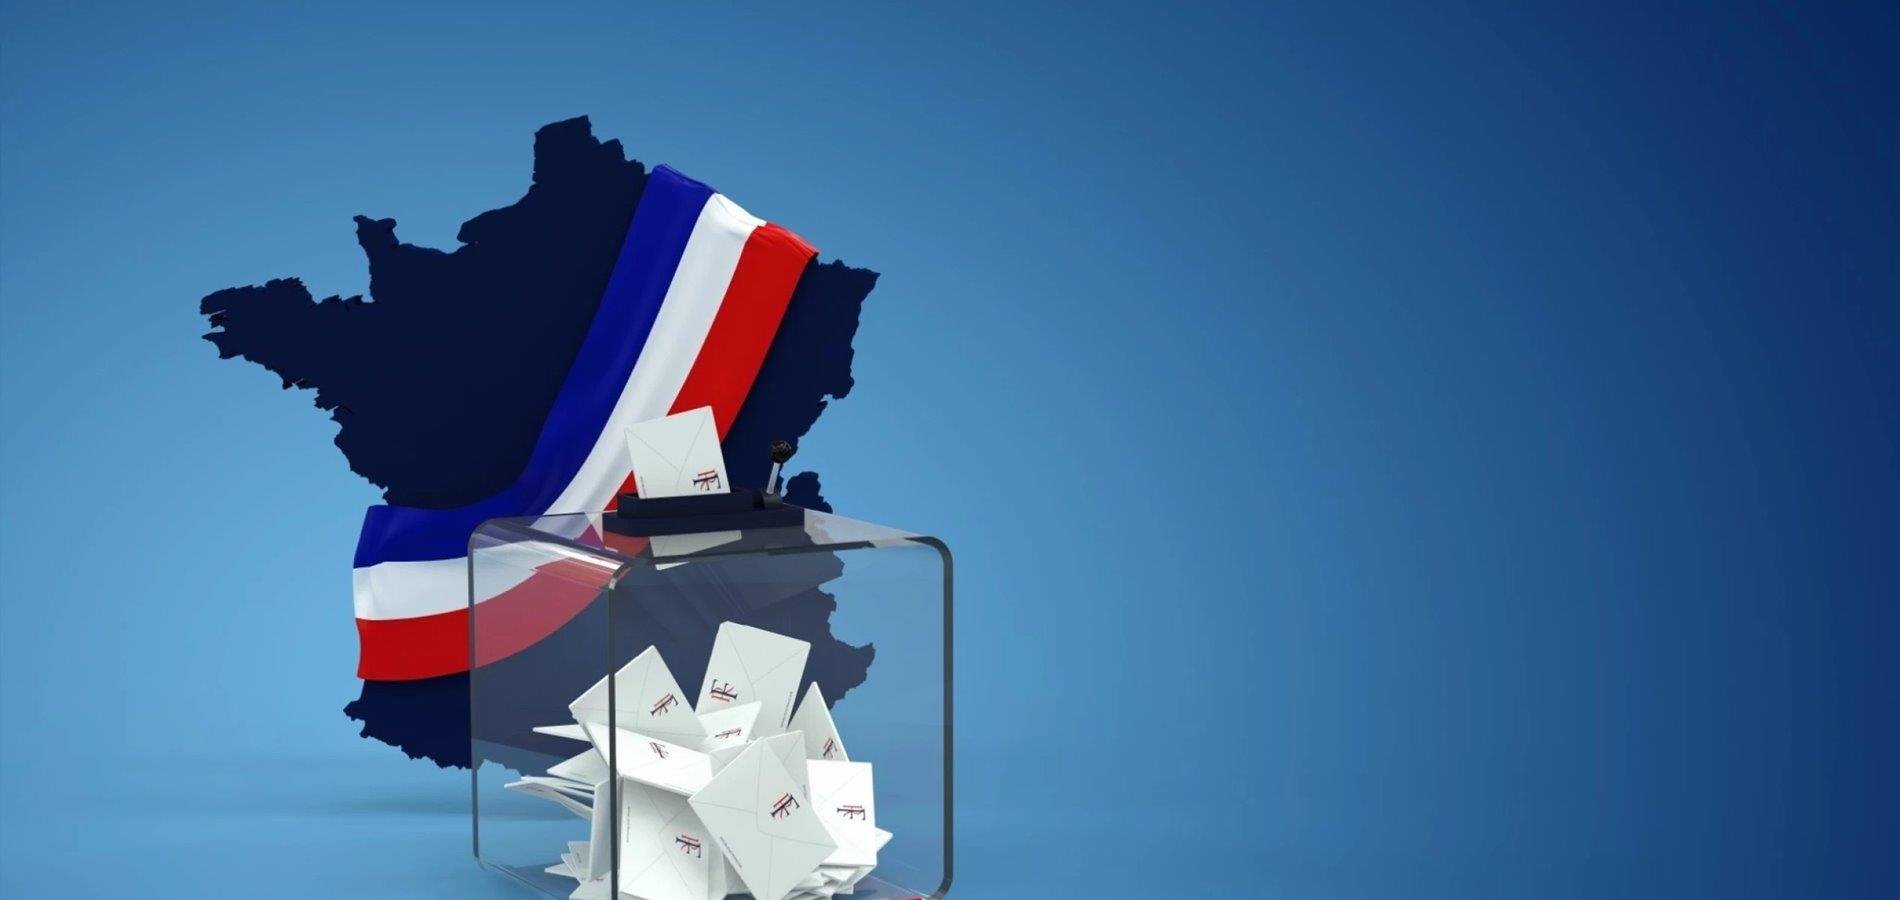 A deep-dive on the French elections